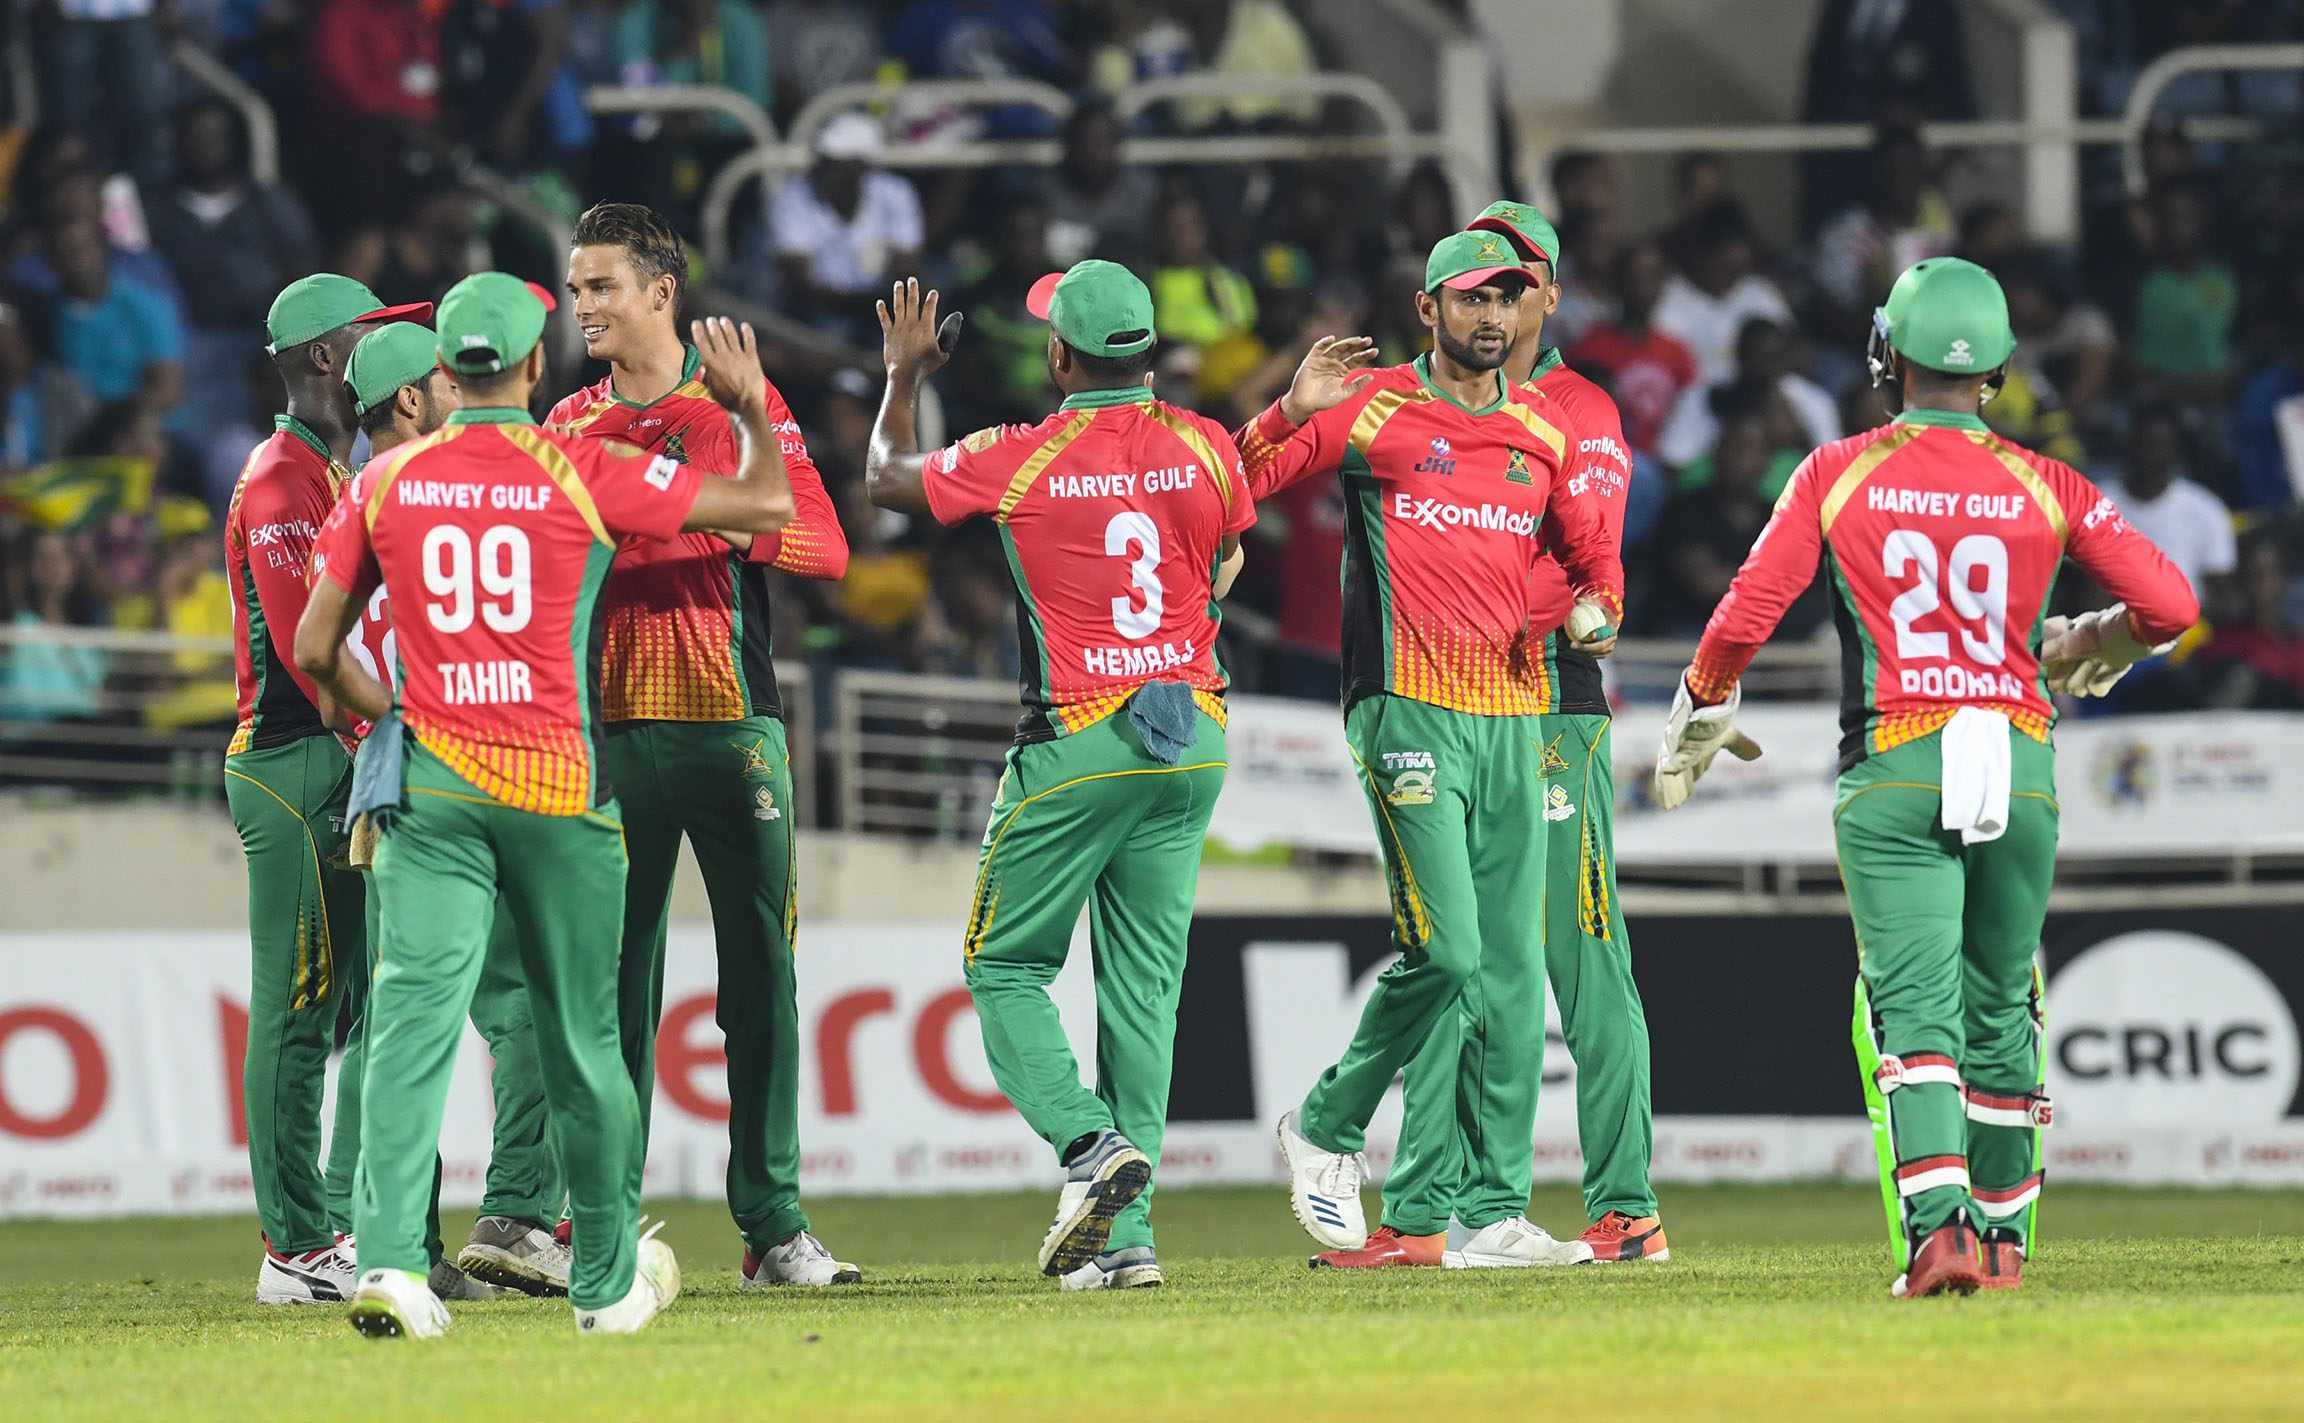 Guyana Amazon Warriors 7th straight win in the CPL 2019 IzzSo News